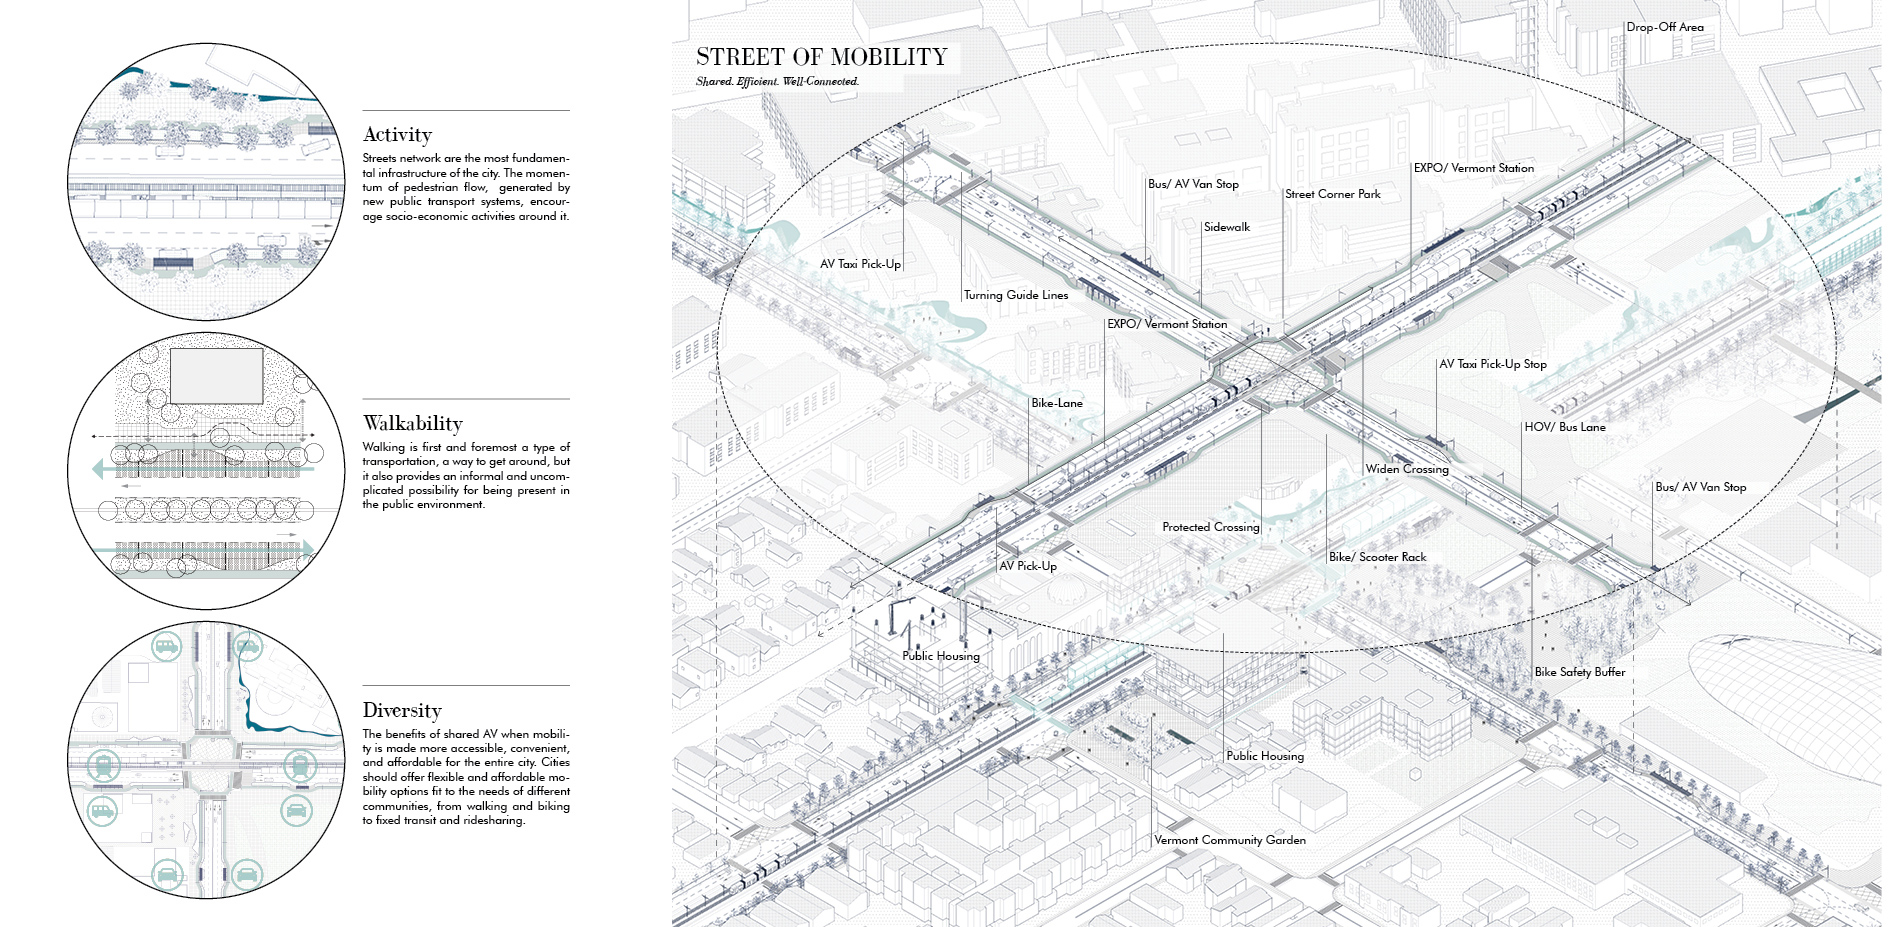 Streets of Mobility